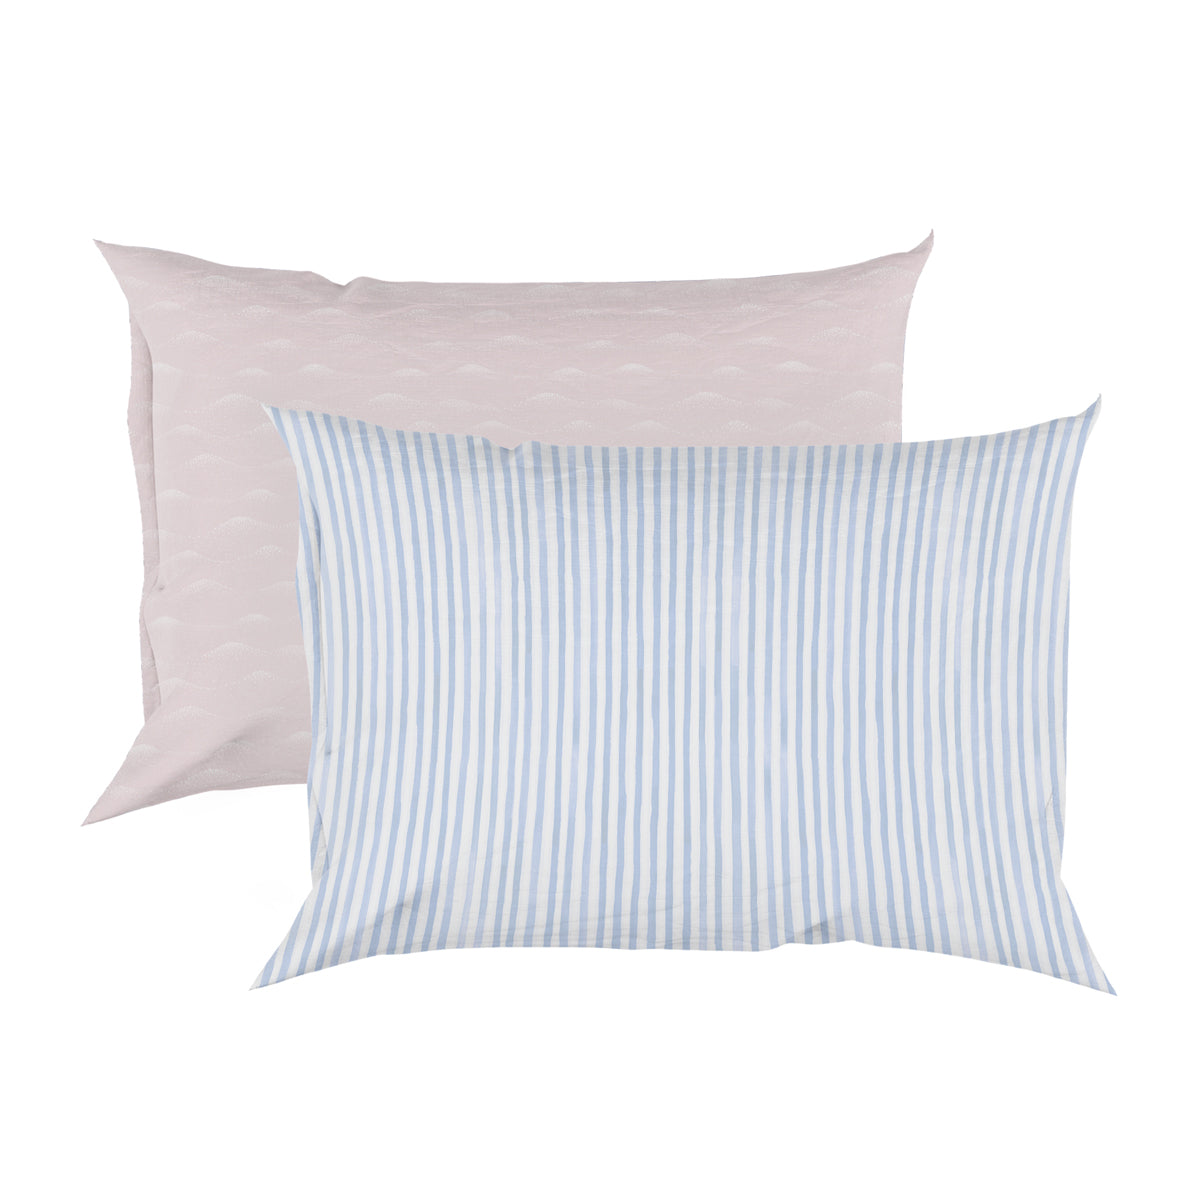 A pair of queen silk pillowcases - Simple Stripe and Moon Dust